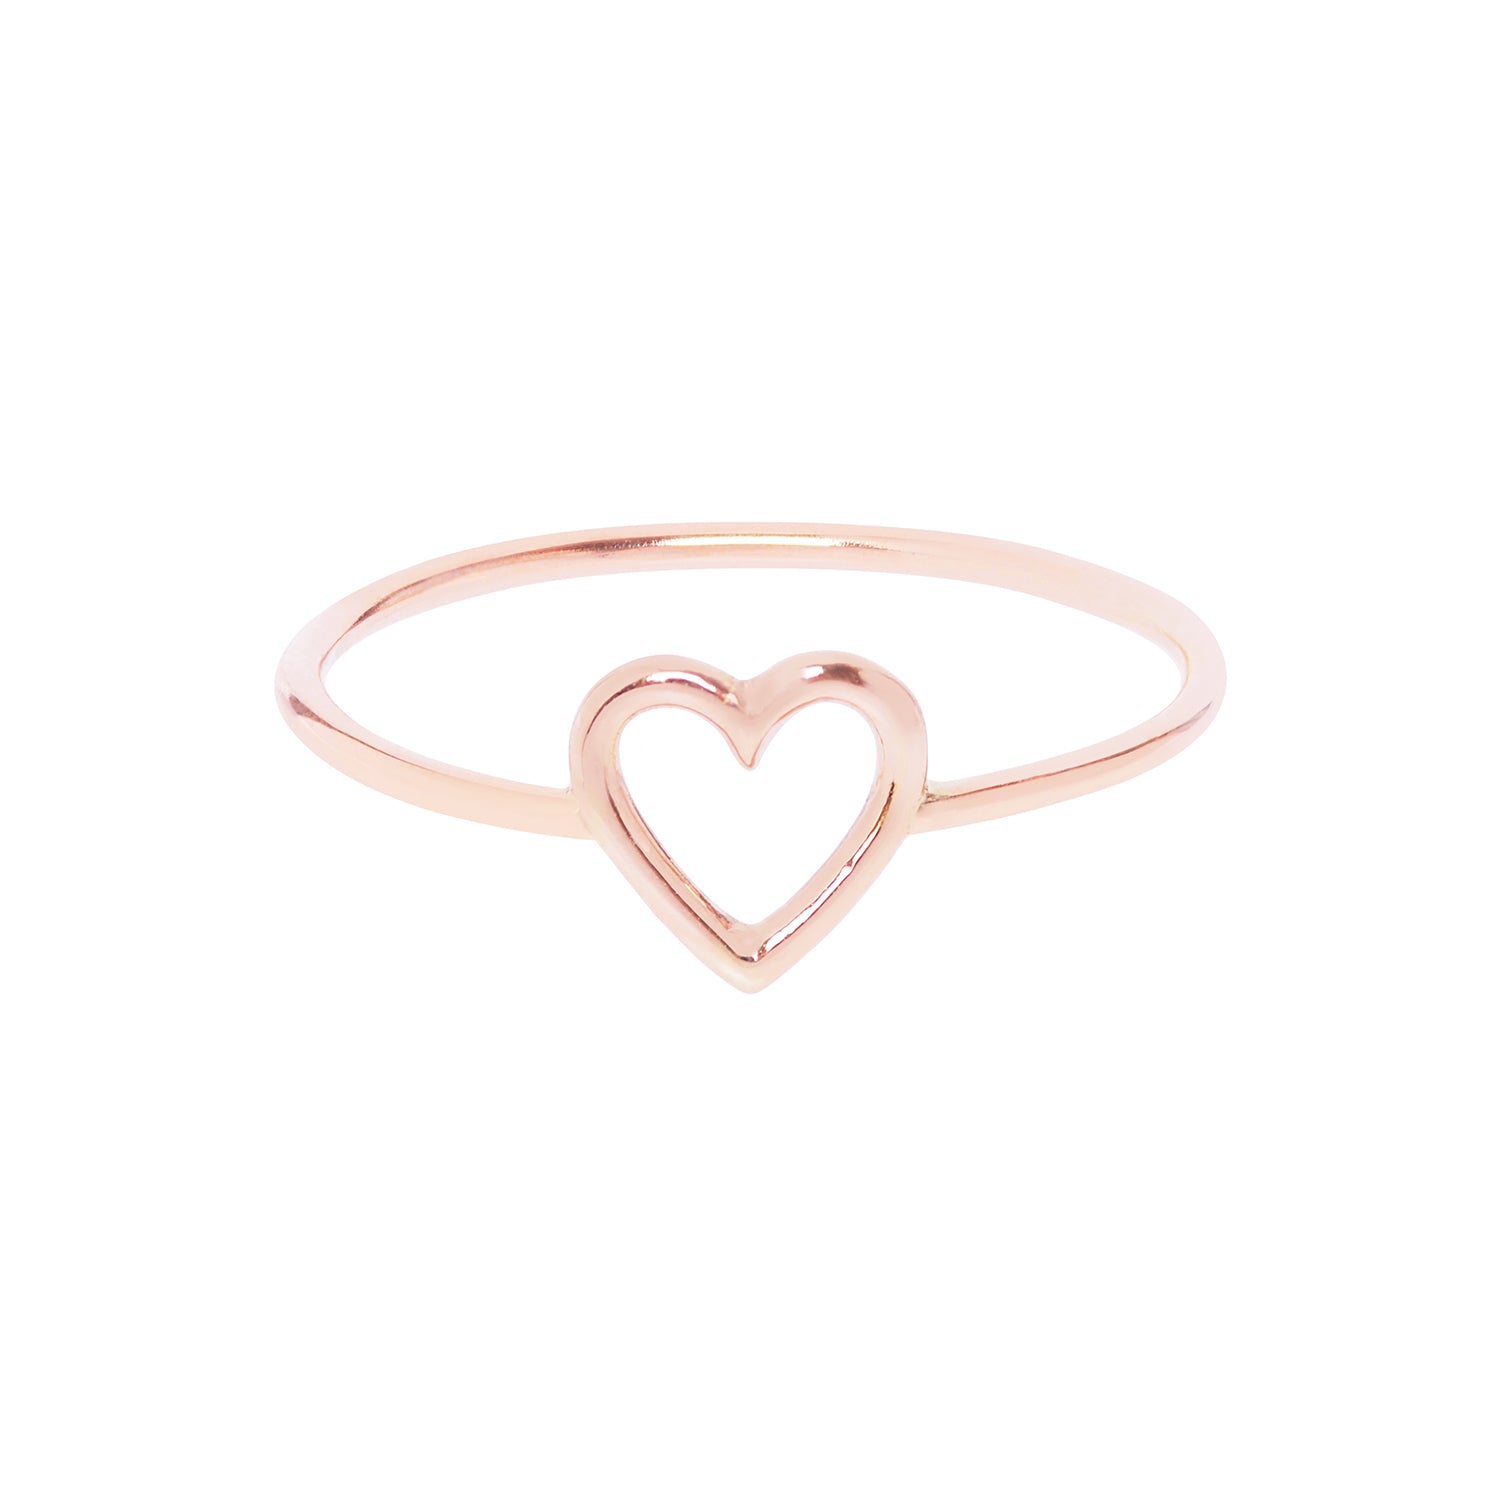 18ct Rose Gold Heart Ring by McFarlane Fine Jewellery